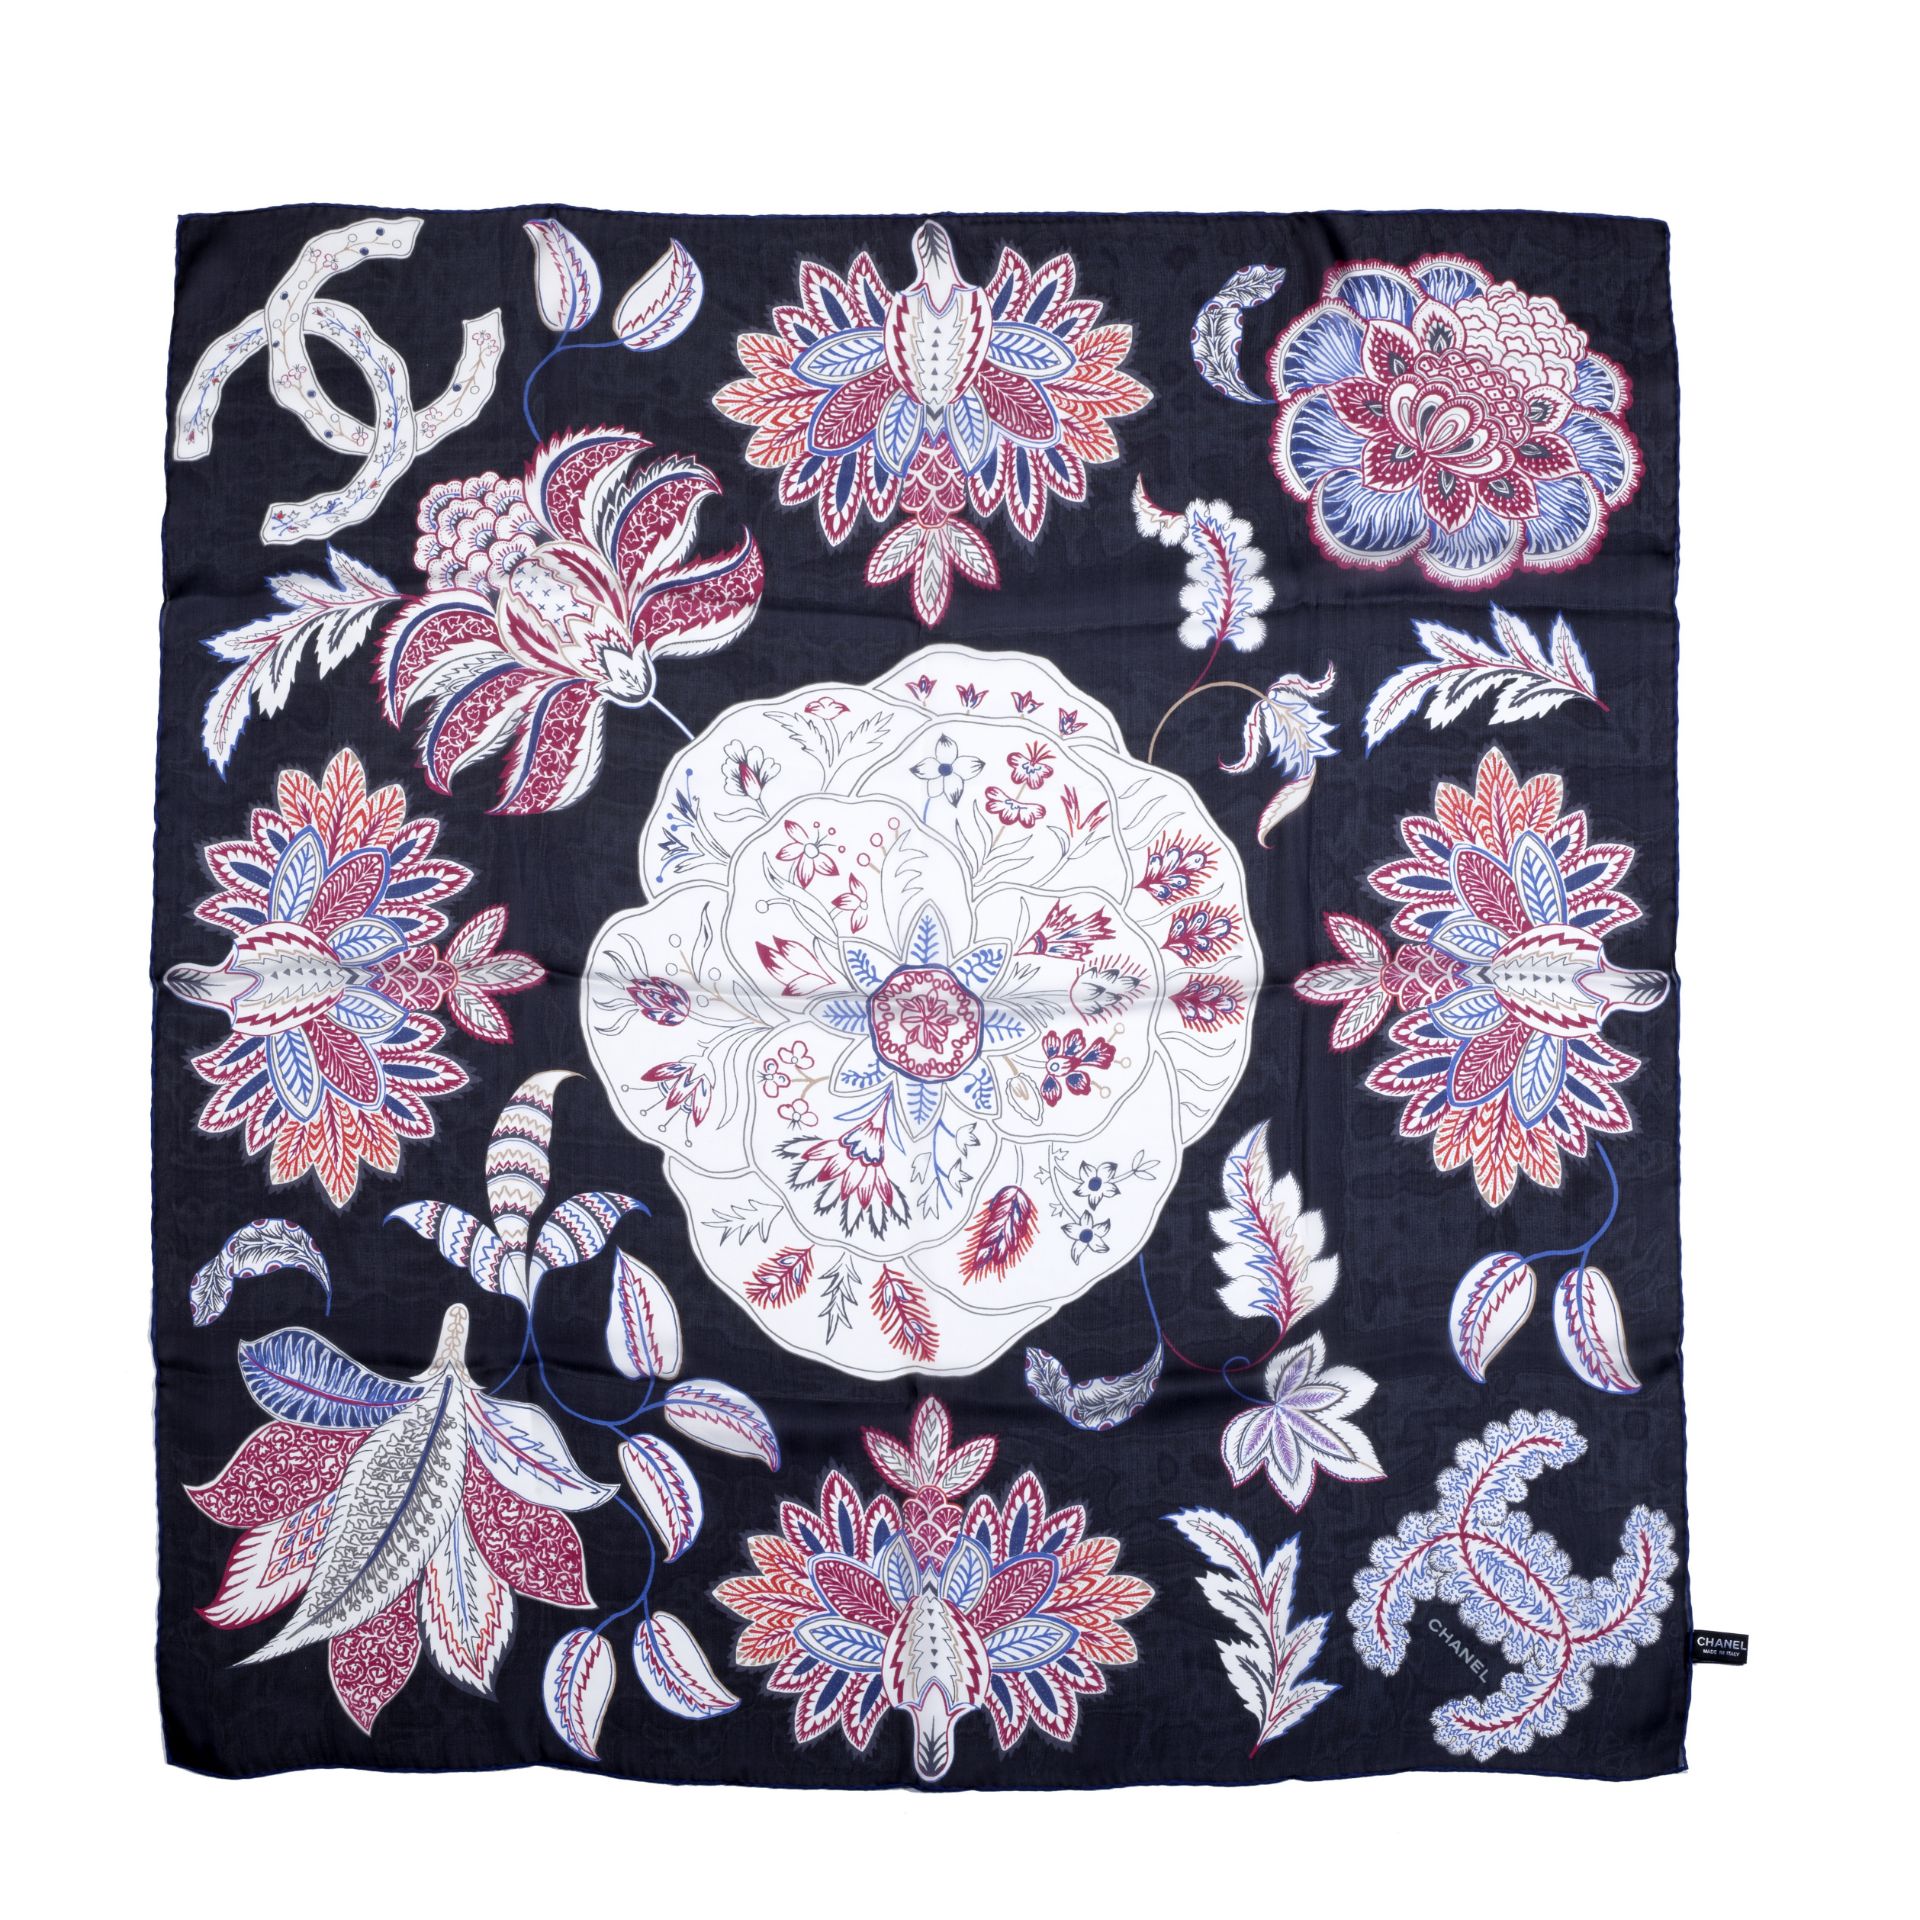 Navy Floral Silk Scarf, Chanel, (Includes box)